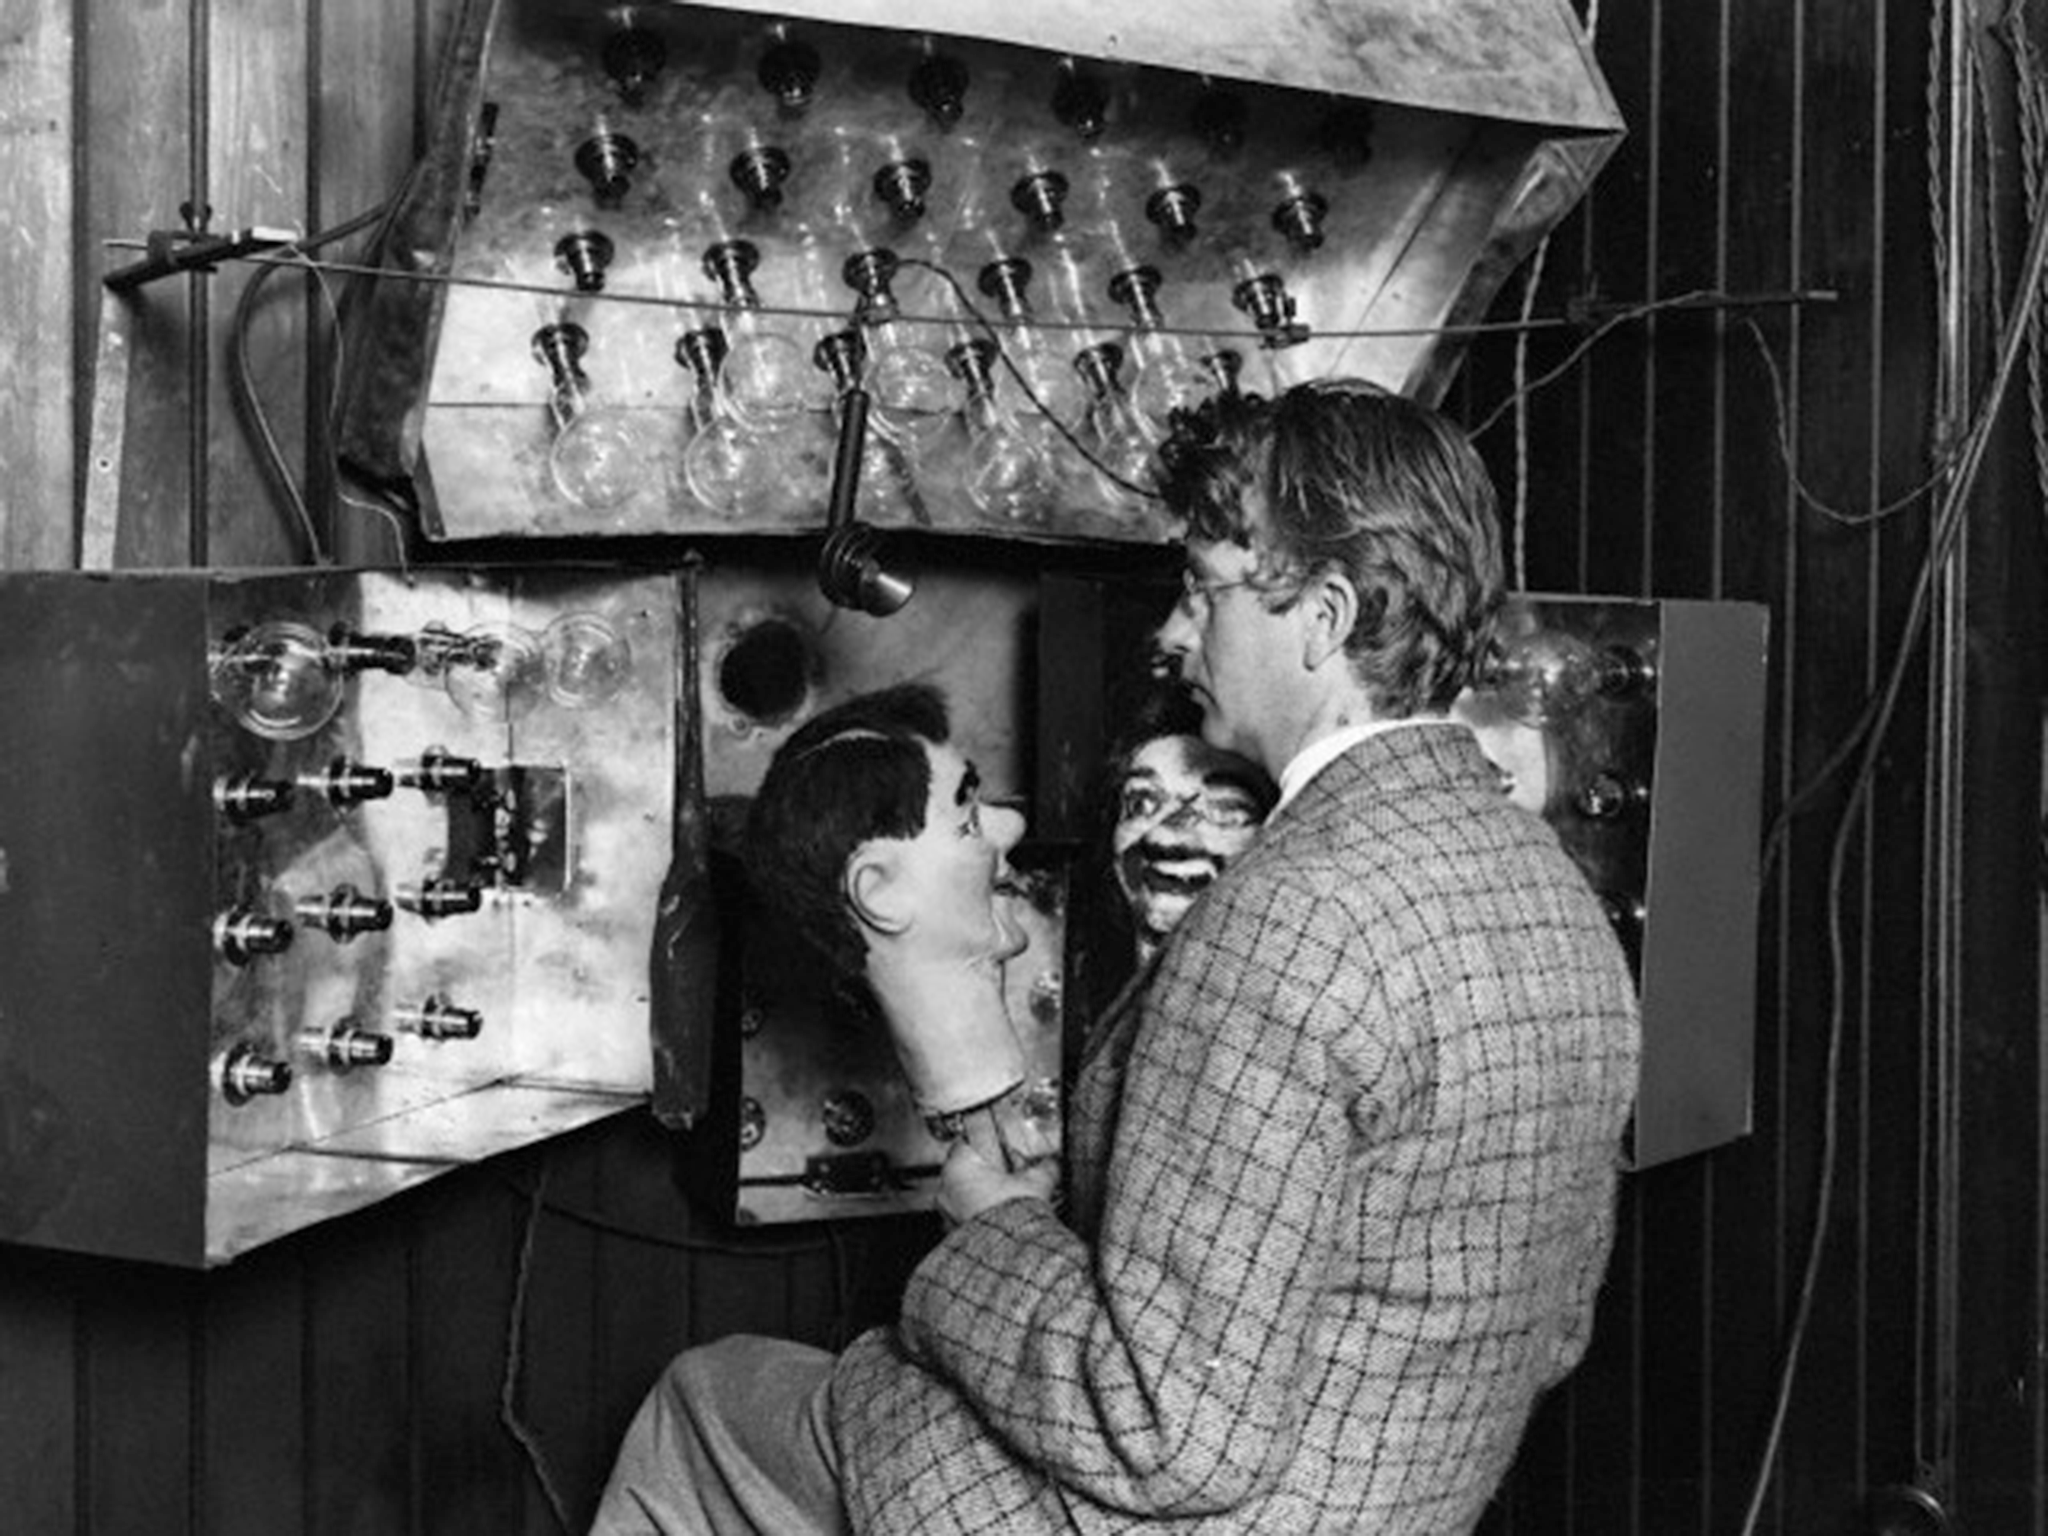 John Logie Baird demonstrates his invention in July 1926, first using a dummy known as "Stooky Bill" before finding a real human subject